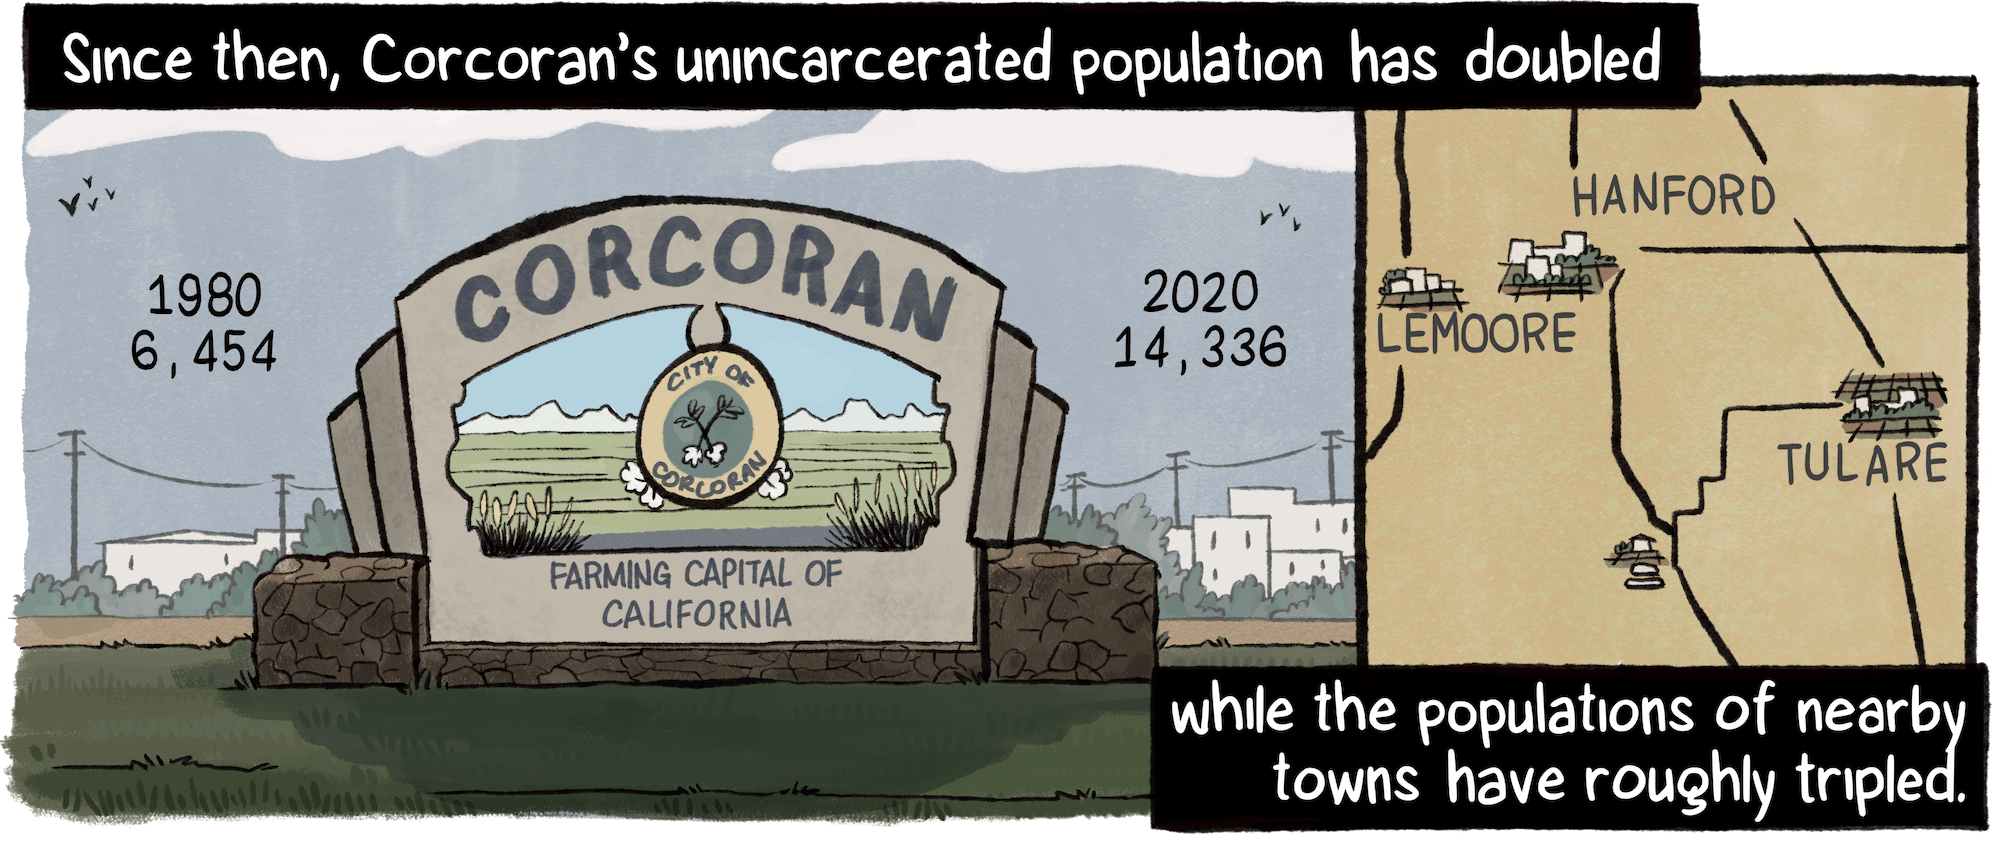 Since then, Corcoran’s unincarcerated population has doubled, while the populations of nearby towns have roughly tripled. A sign for Corcoran shows the population going from 6,454 in 1980 to 14,336 in 2020. A map shows nearby towns.